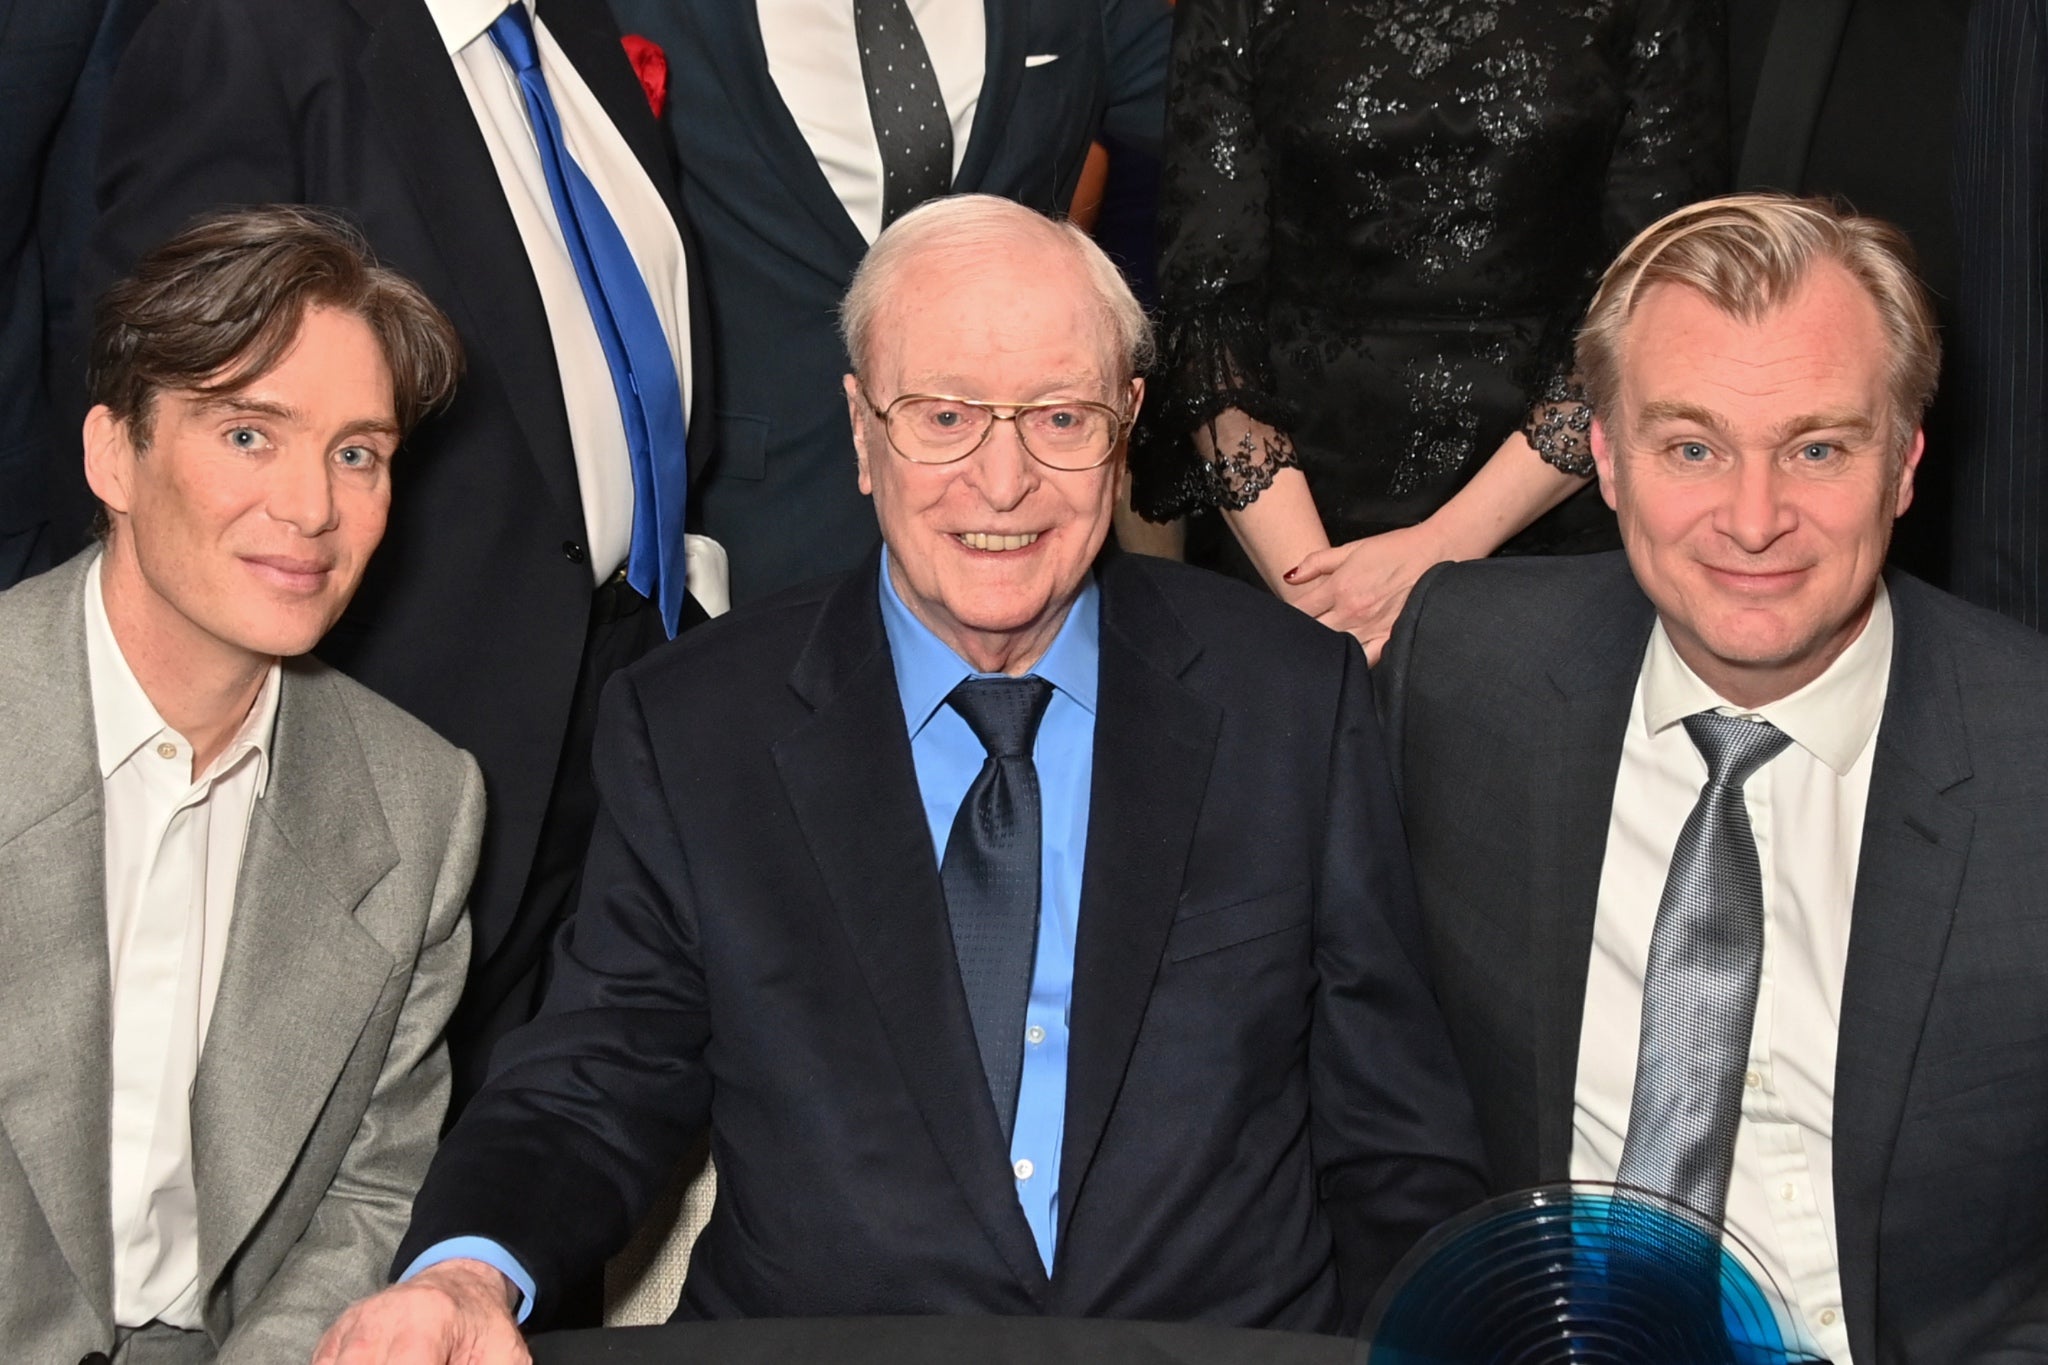 Christopher Nolan explains why Michael Caine wasn't in Oppenheimer